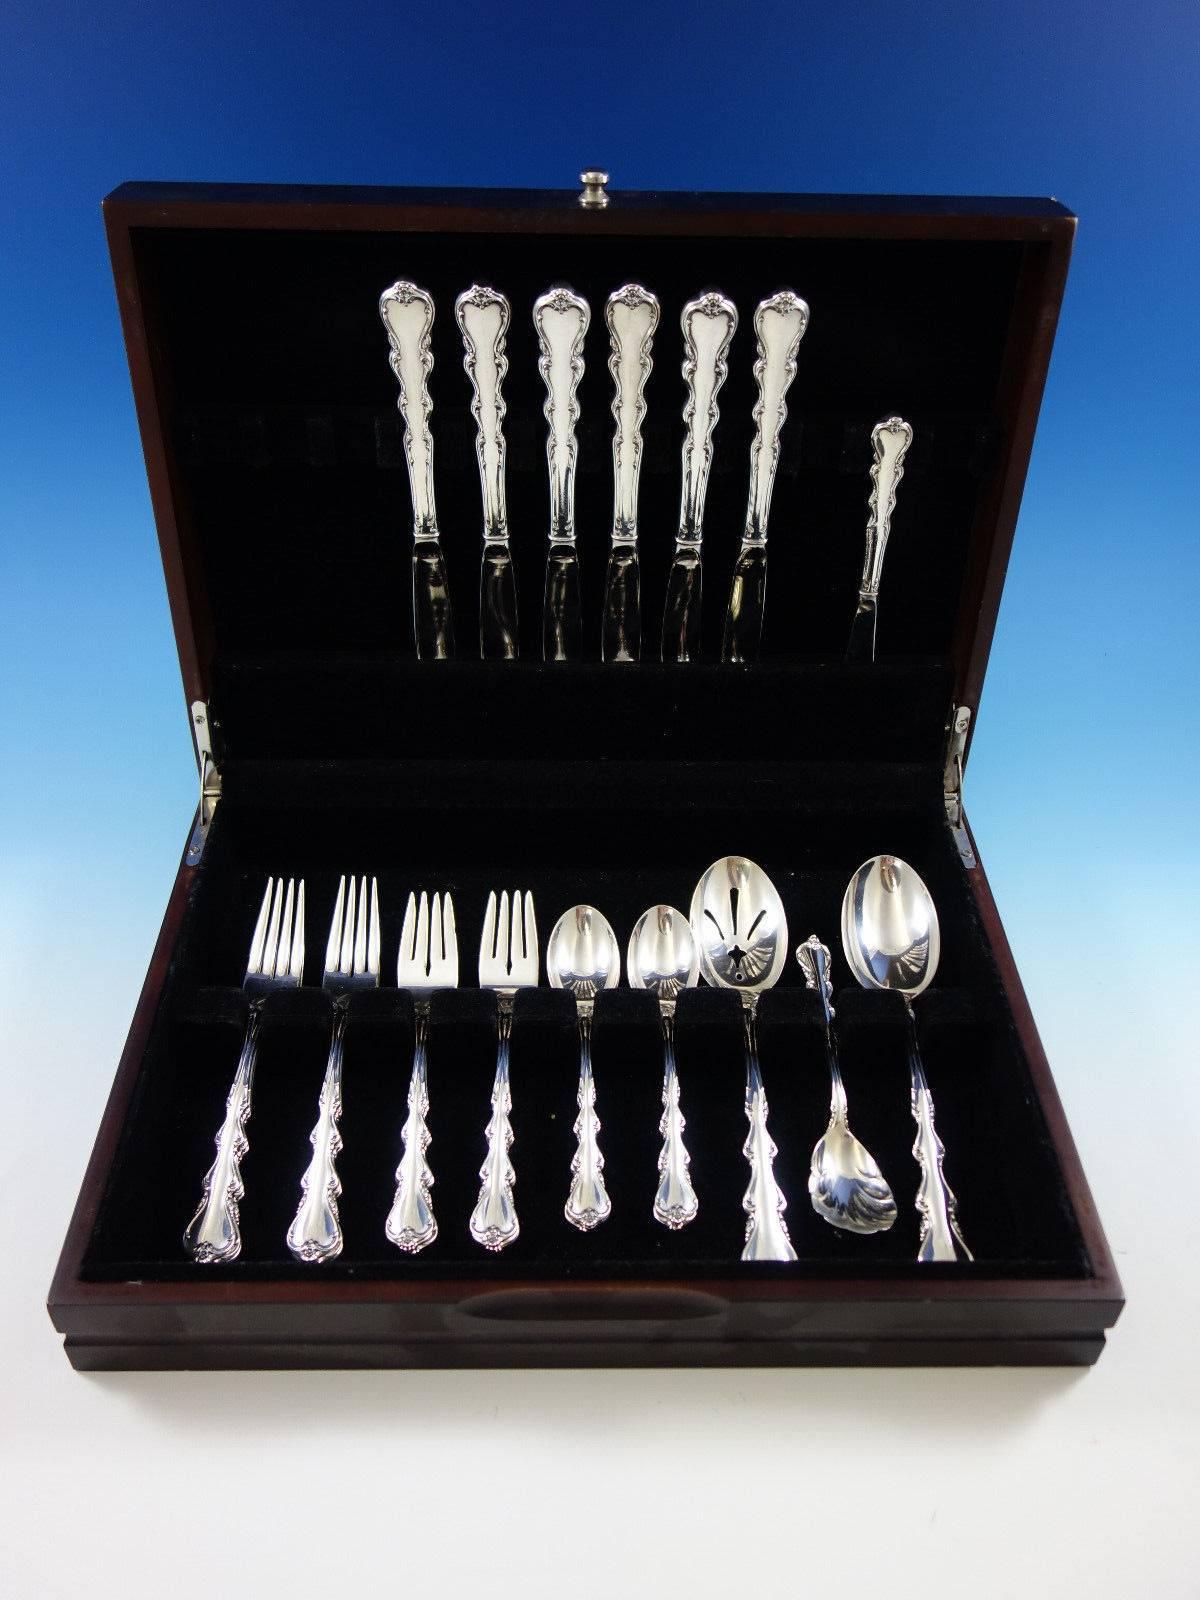 Angelique by International sterling silver flatware set 28 pieces. This set includes:
 
Six knives, 9 1/4